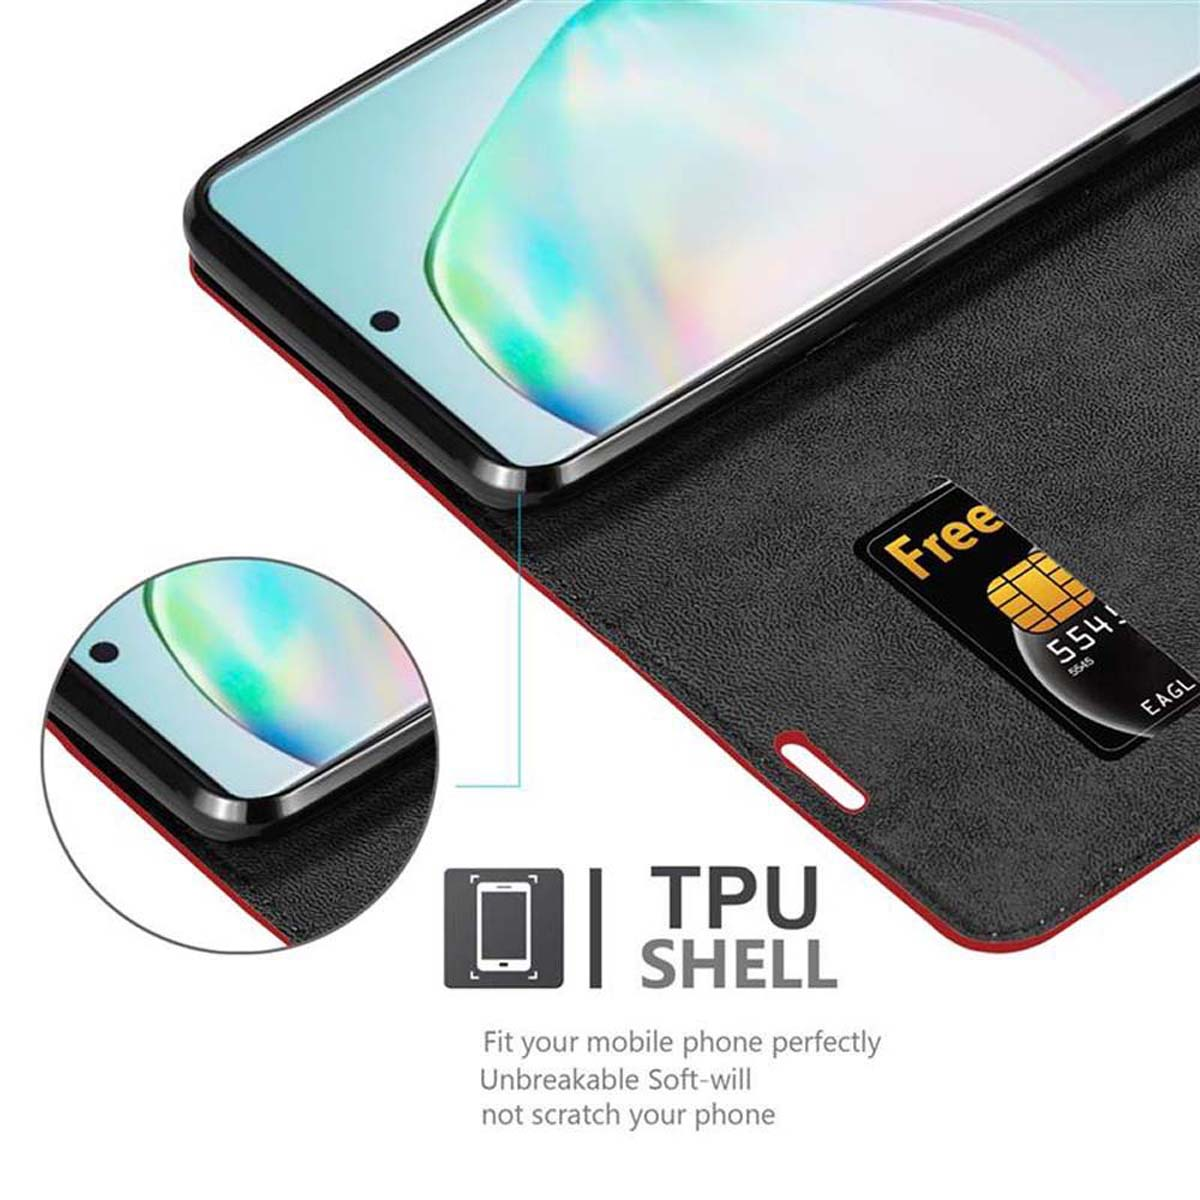 / Samsung, CADORABO / Book Magnet, APFEL M80s, Hülle Invisible LITE A91 Galaxy ROT S10 Bookcover,